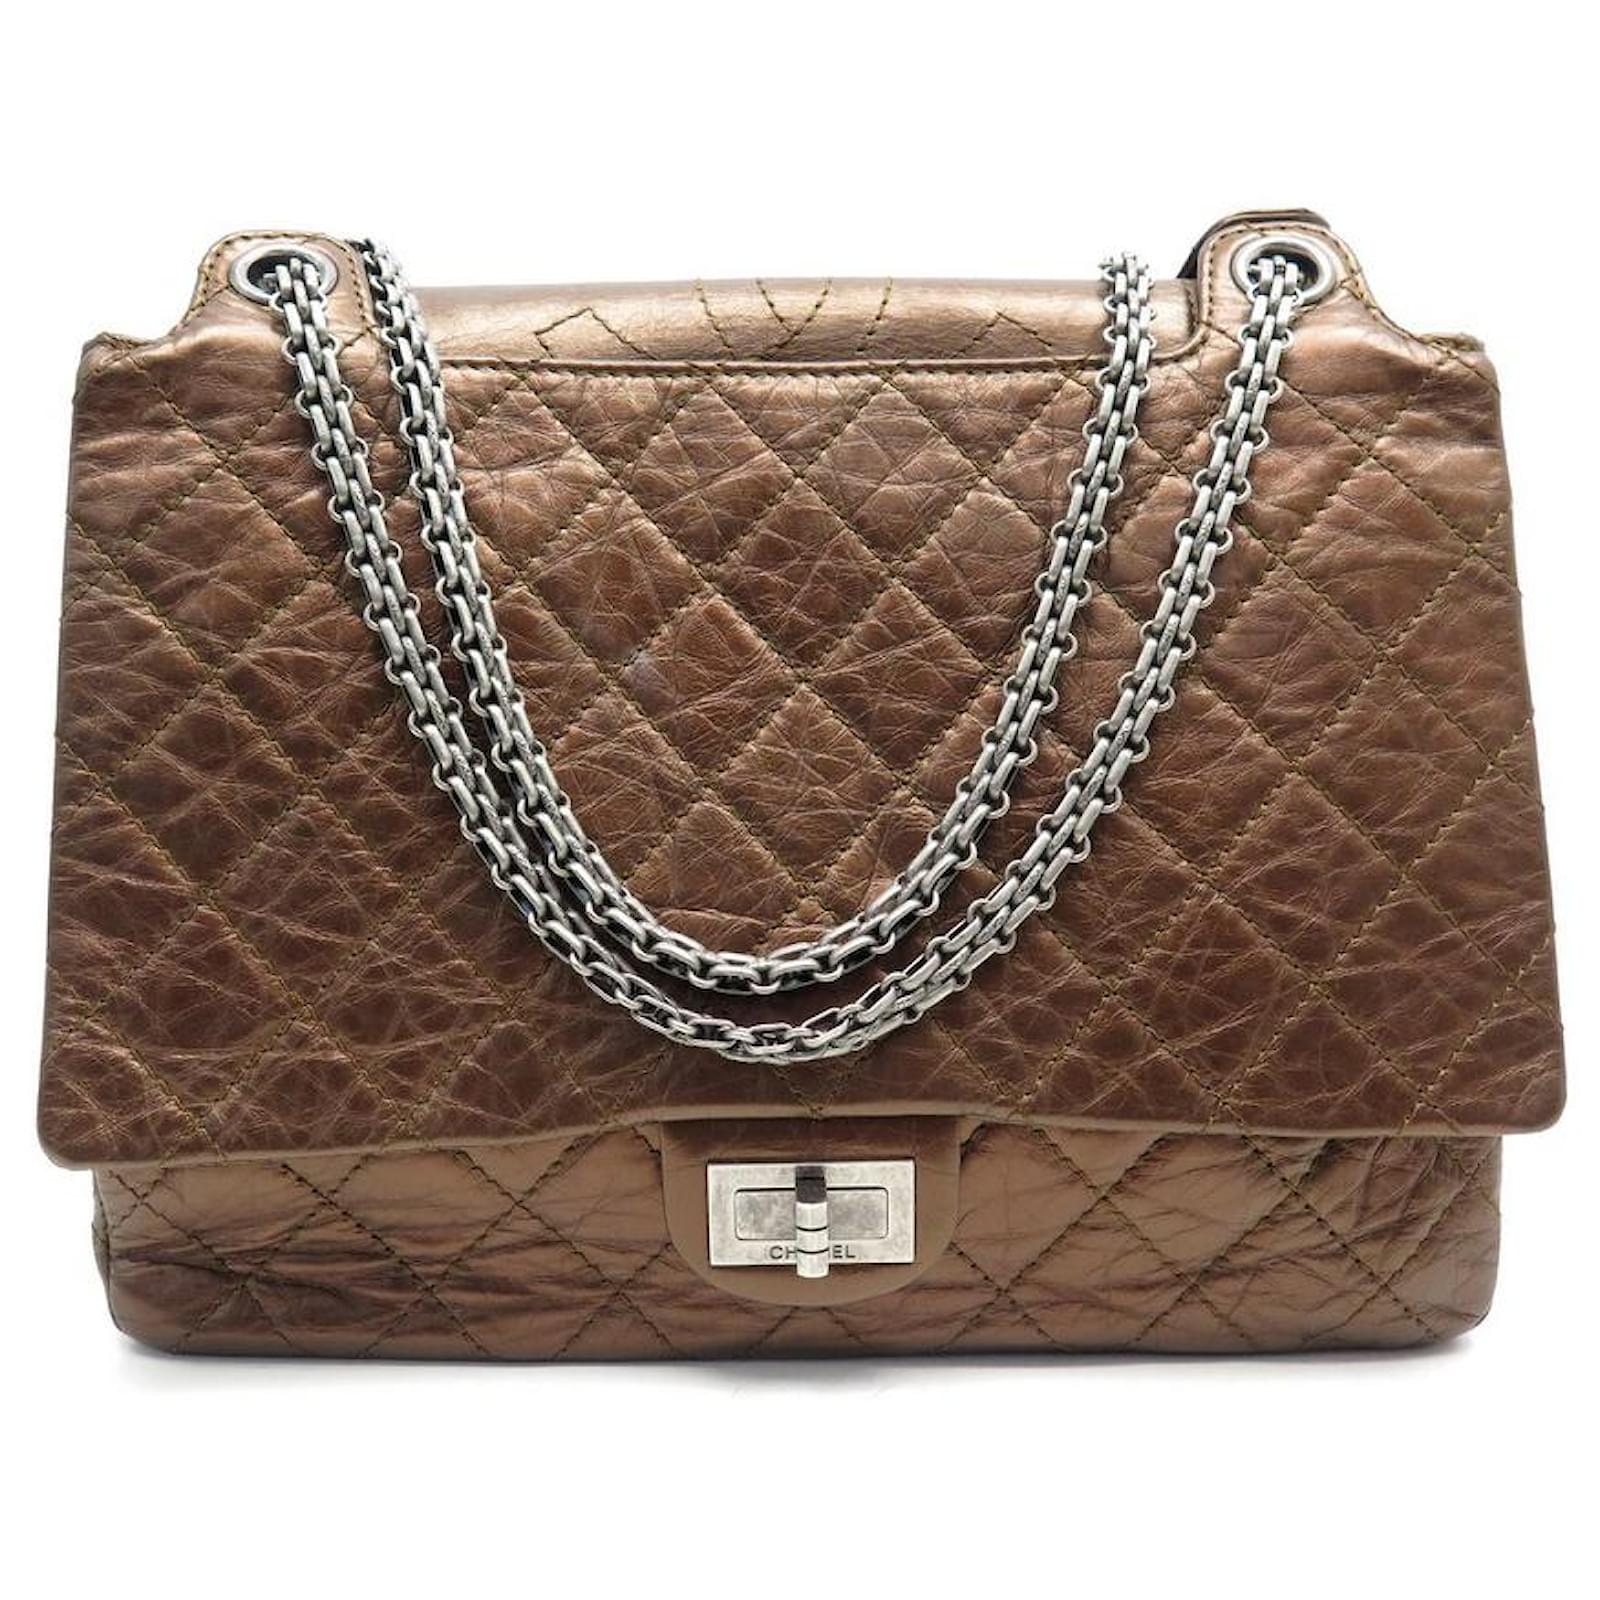 Handbags Chanel Chanel Handbag 2.55 Bronze Leather Hand Bag Quilted Leather Bandouliere